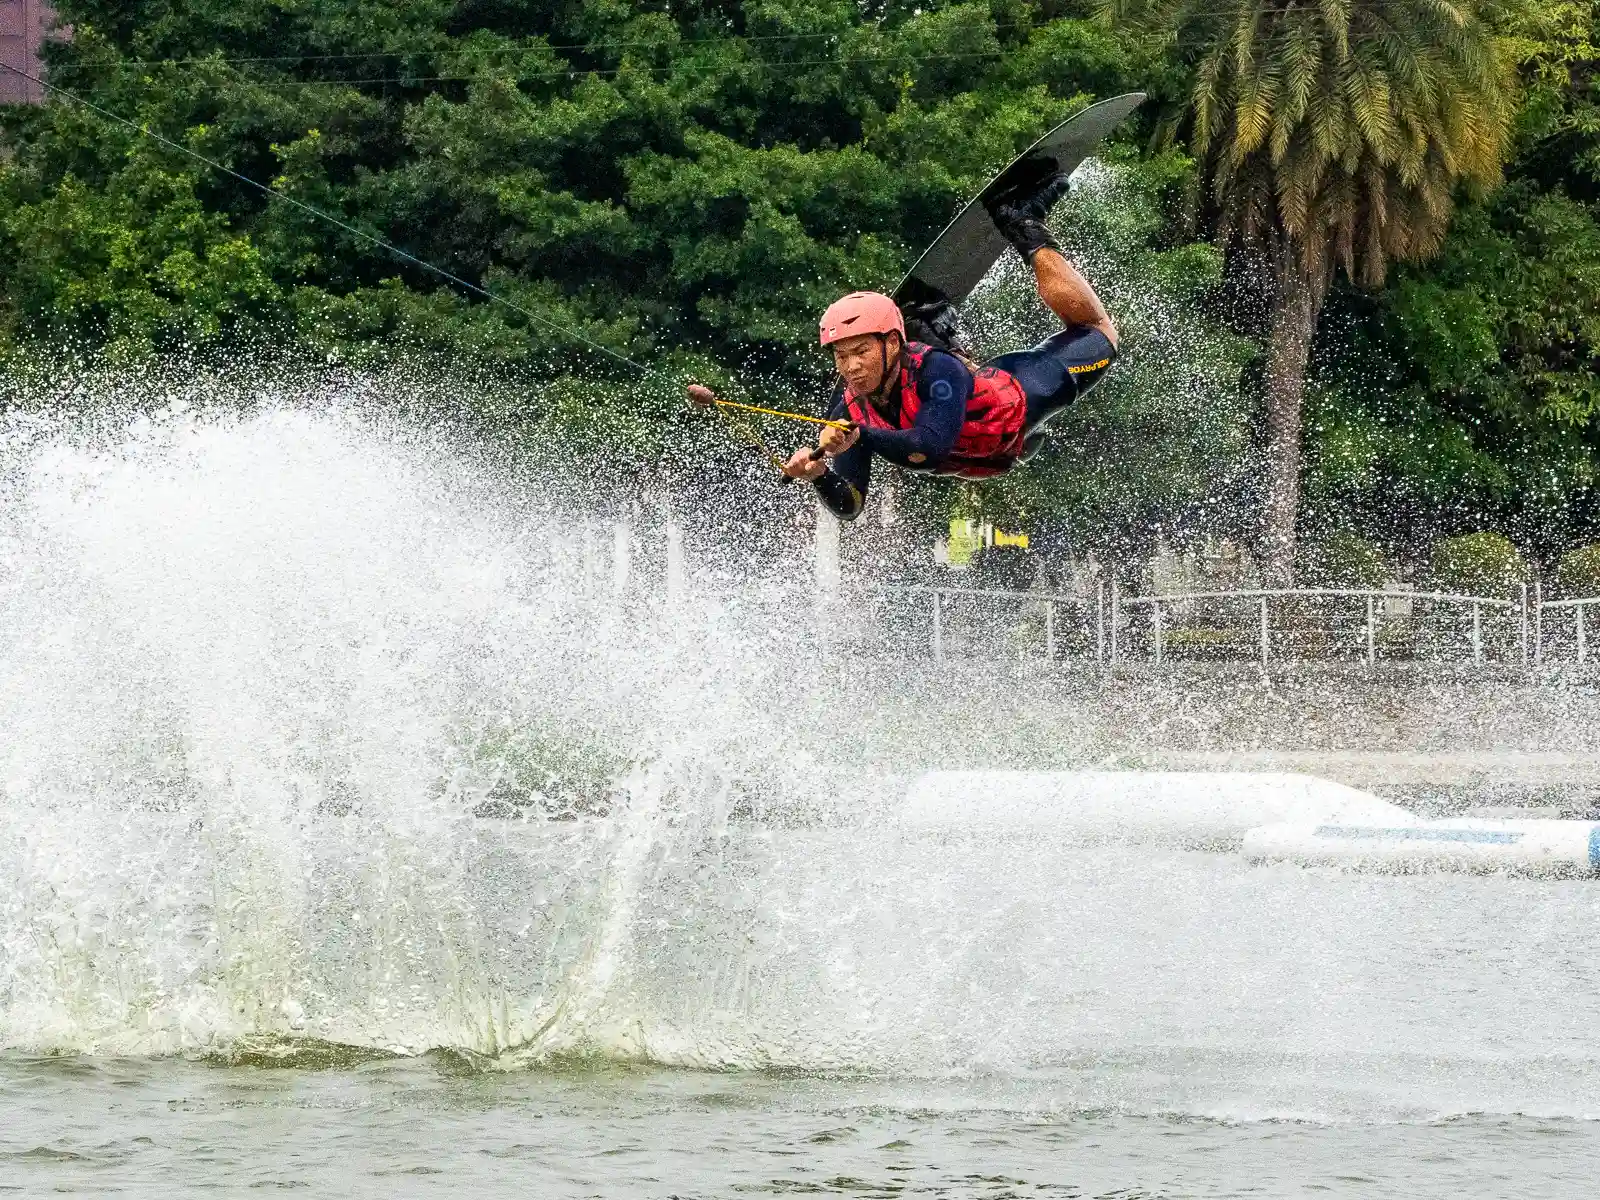 A wakeboarder flies through the air after performing a jump at Lotus Wake Park.